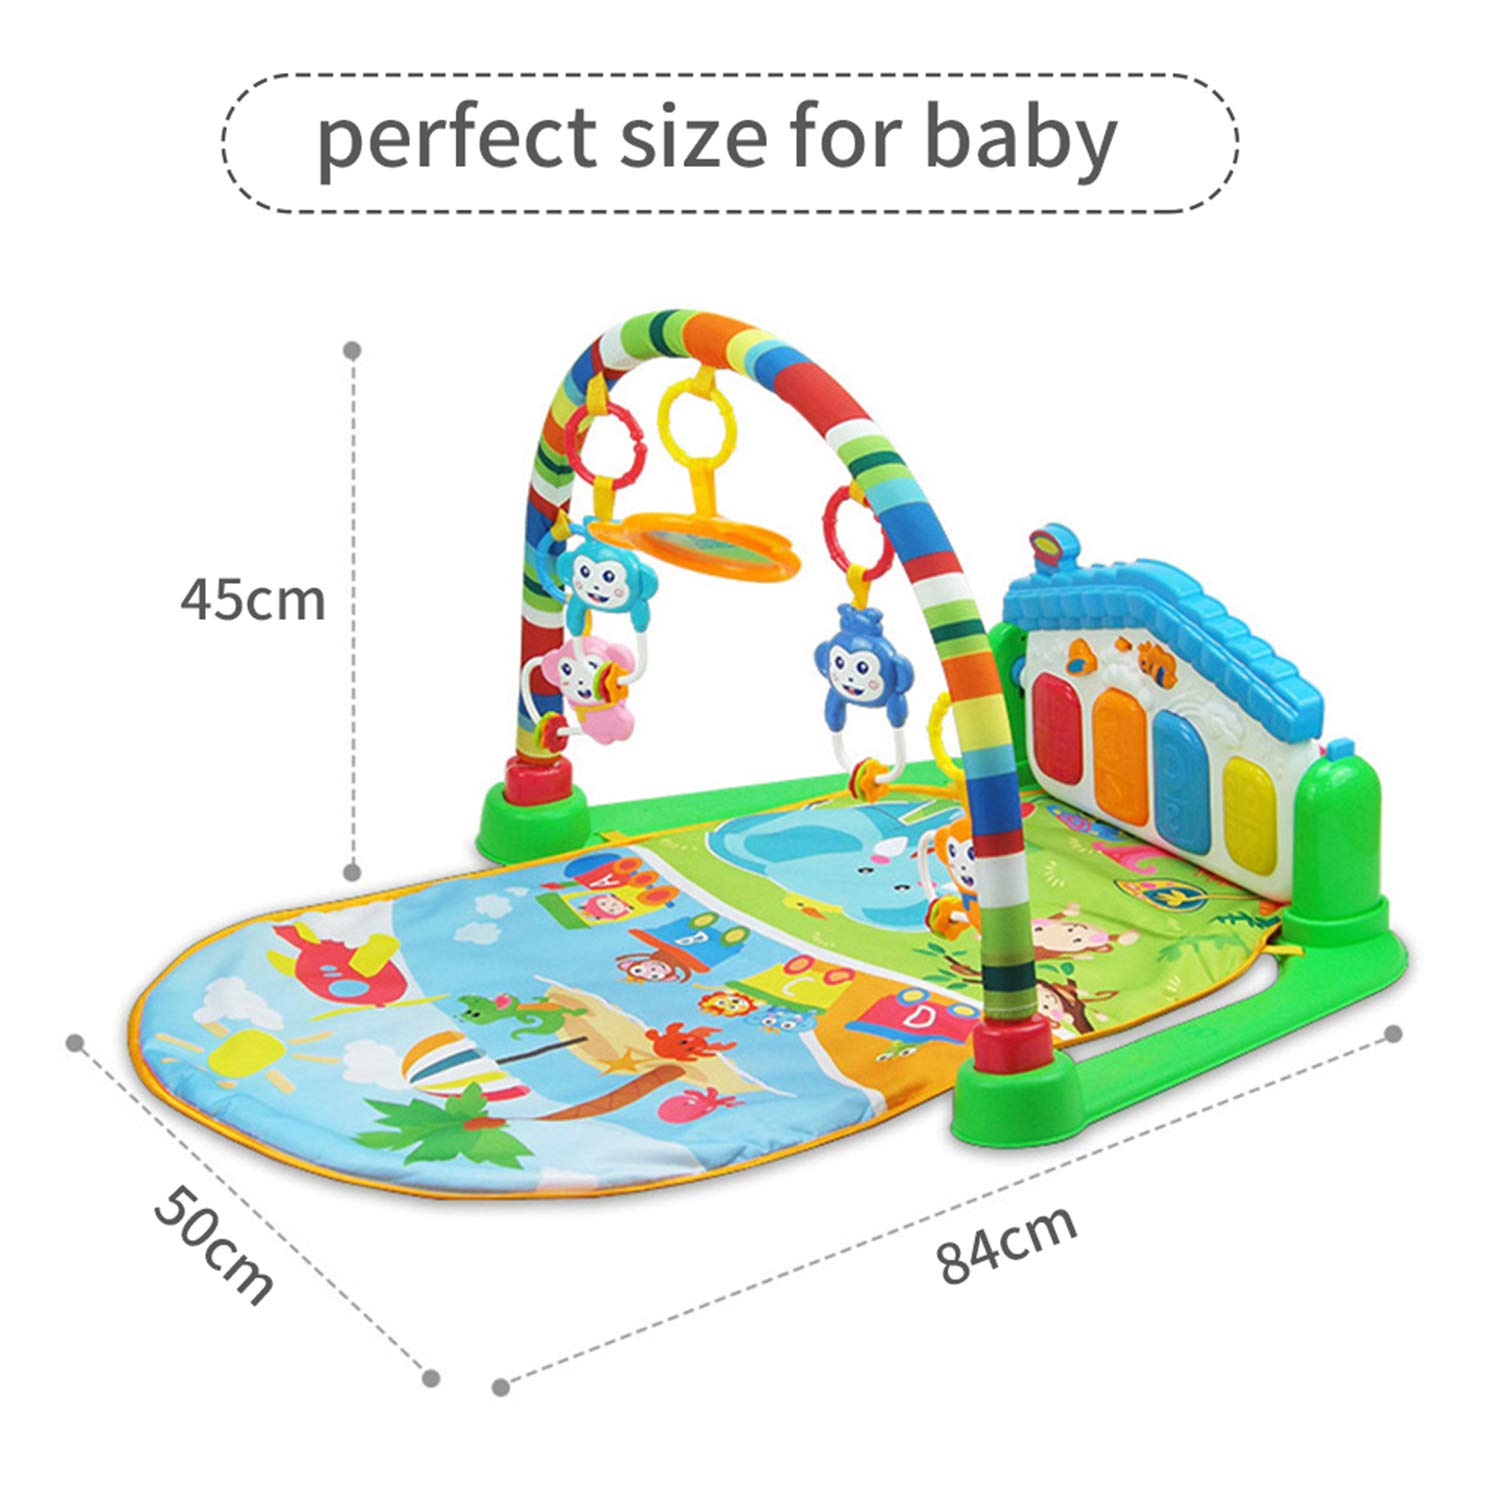 WYSWYG Baby Play Mat Baby Play Gym Activity Mat Kick and Play Piano Gym Activity Center for Baby with Music and Light 0 3 6 12 Months